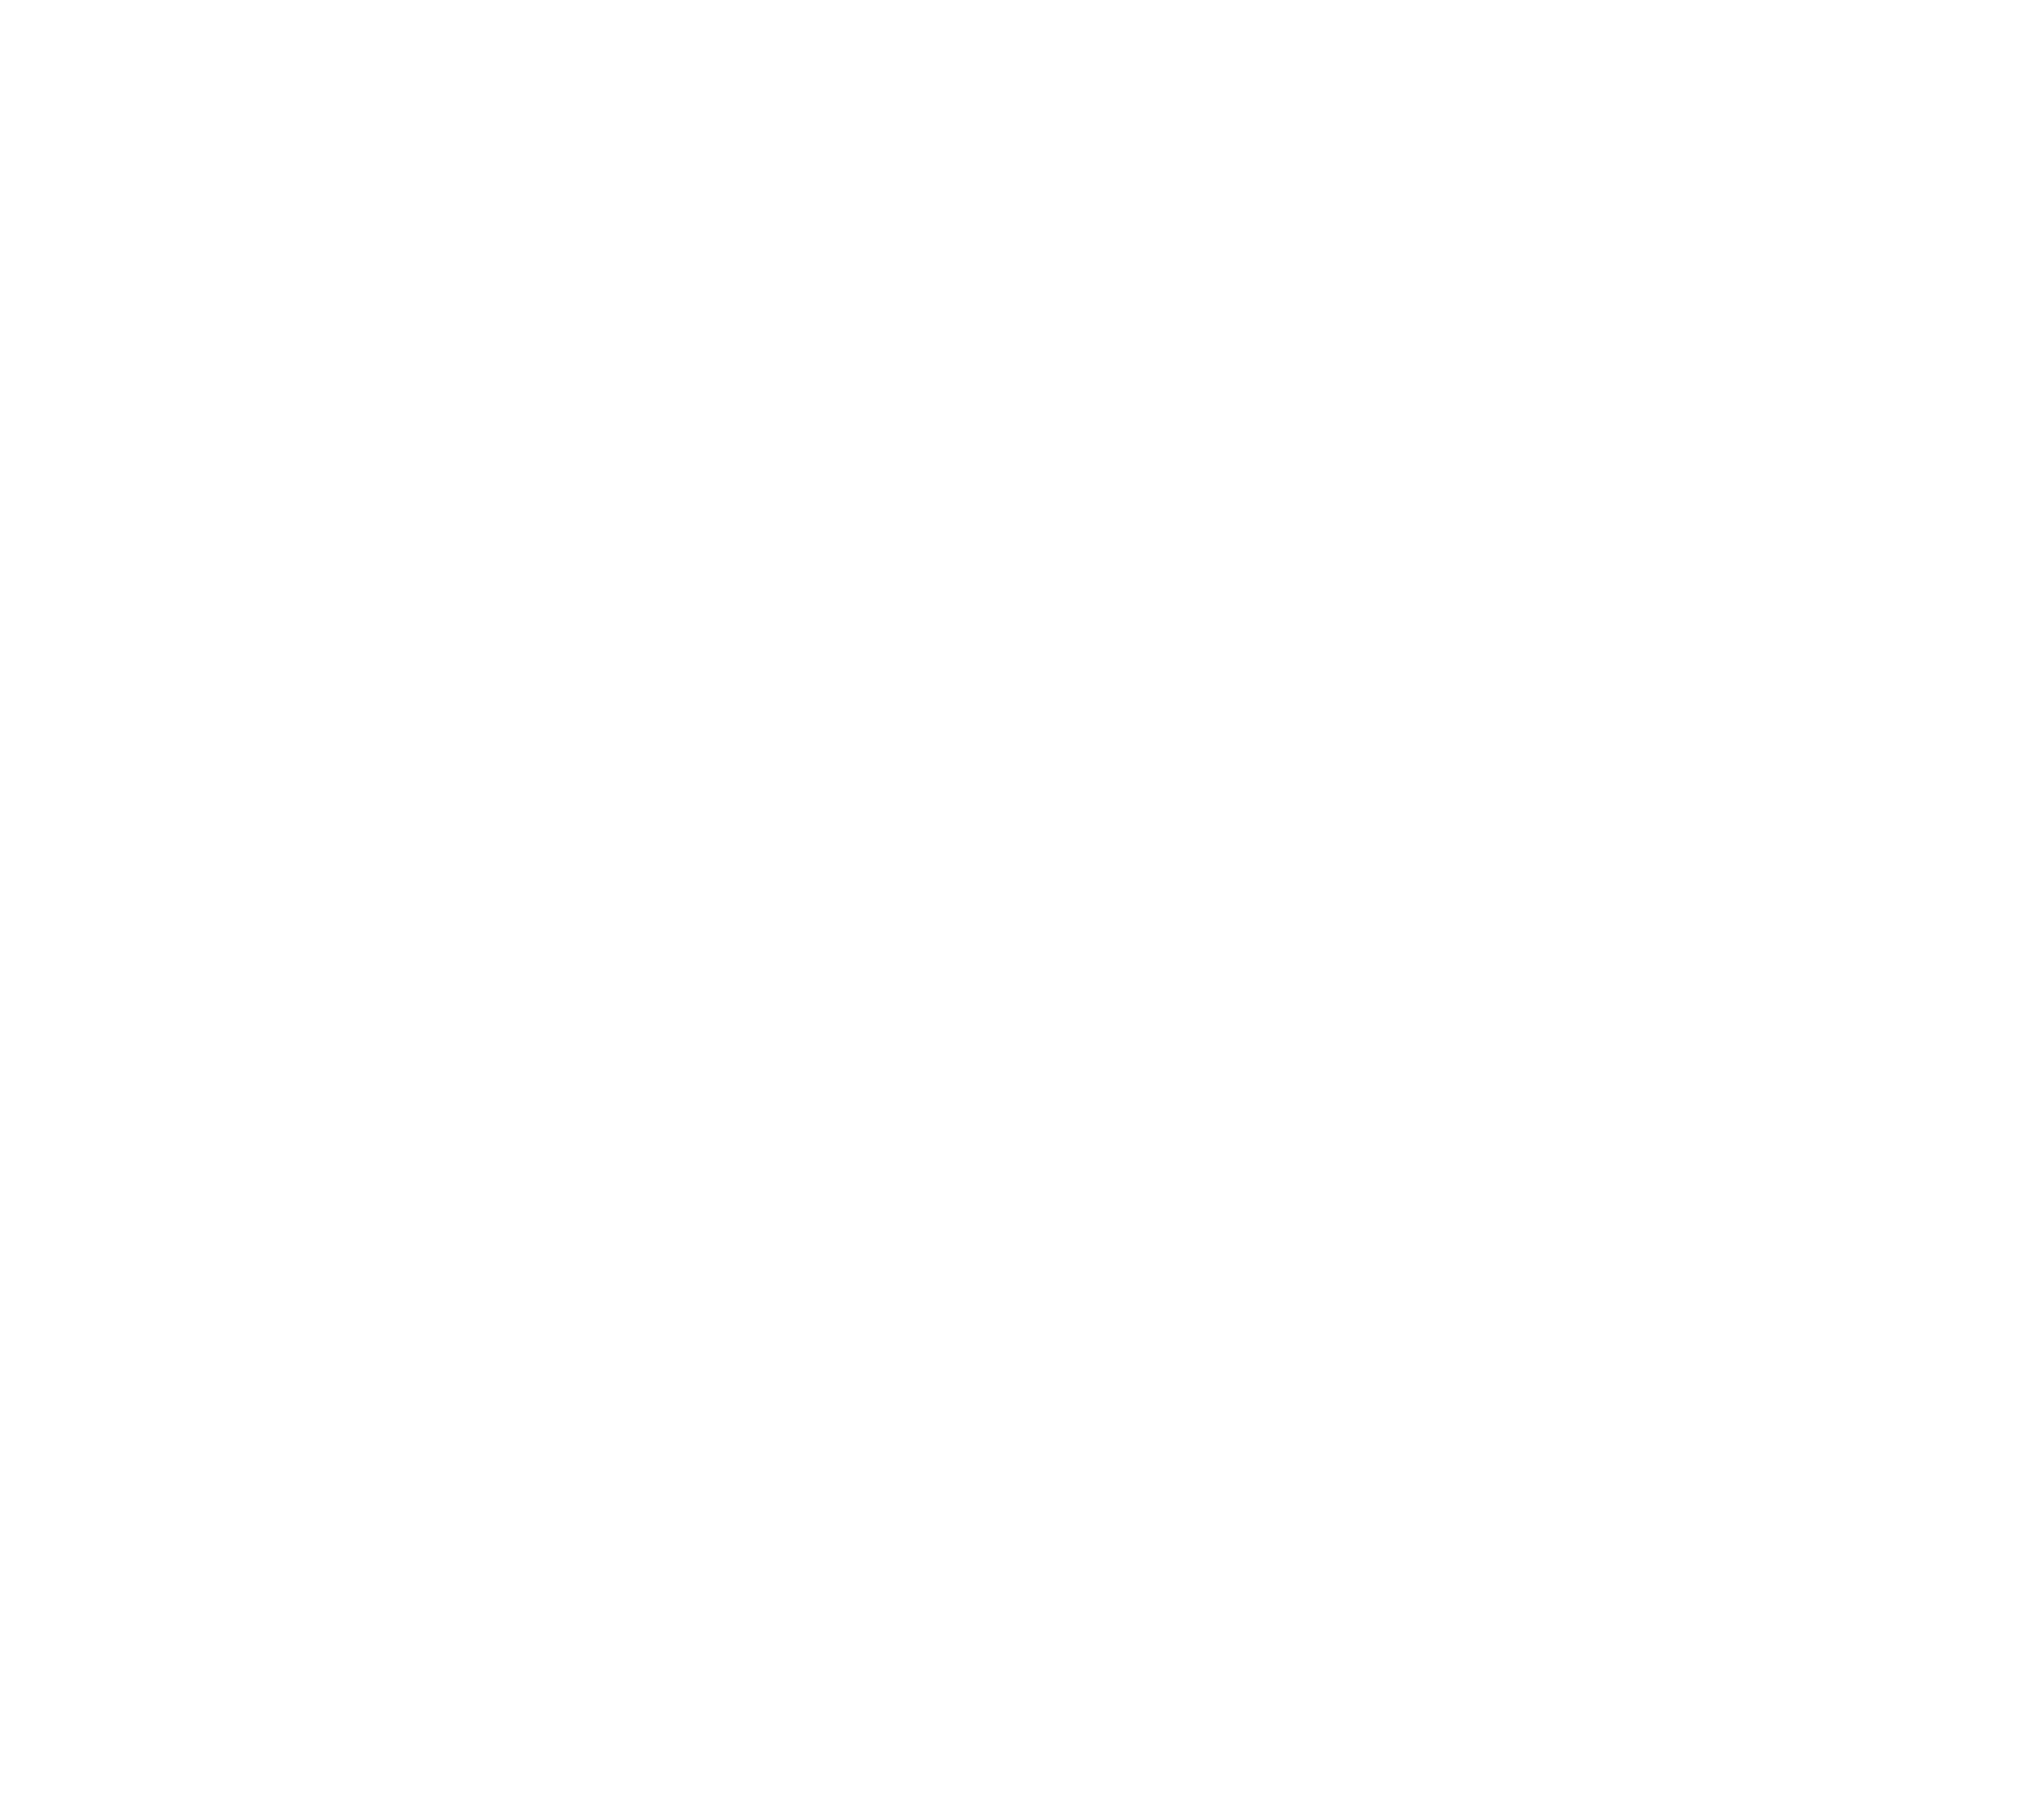 Exhibit NRPA 2024 Annual Conference